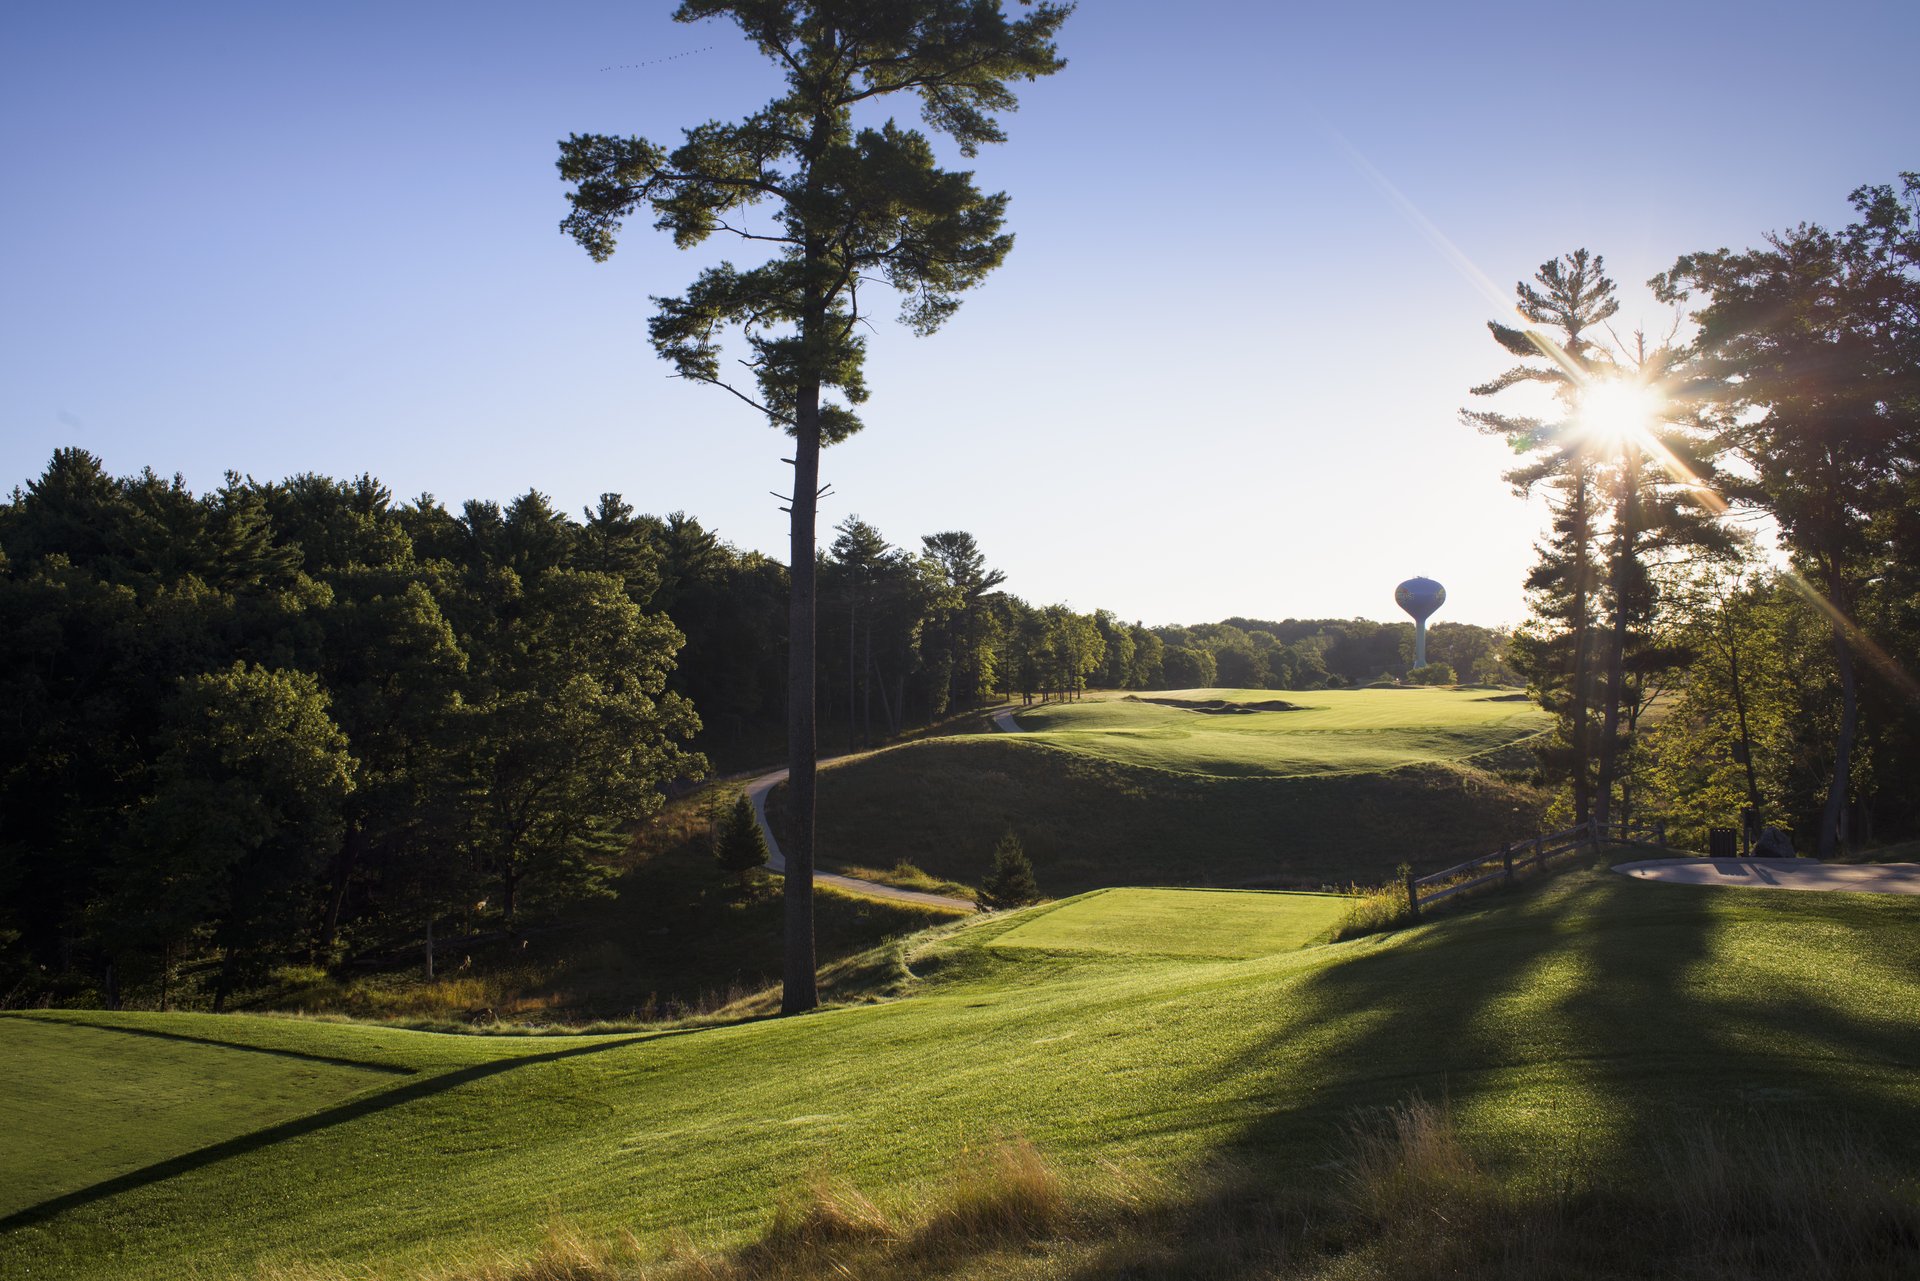 Wild Rock Golf Club at the Wilderness will host a qualifying round of the U.S. Open in May this year.